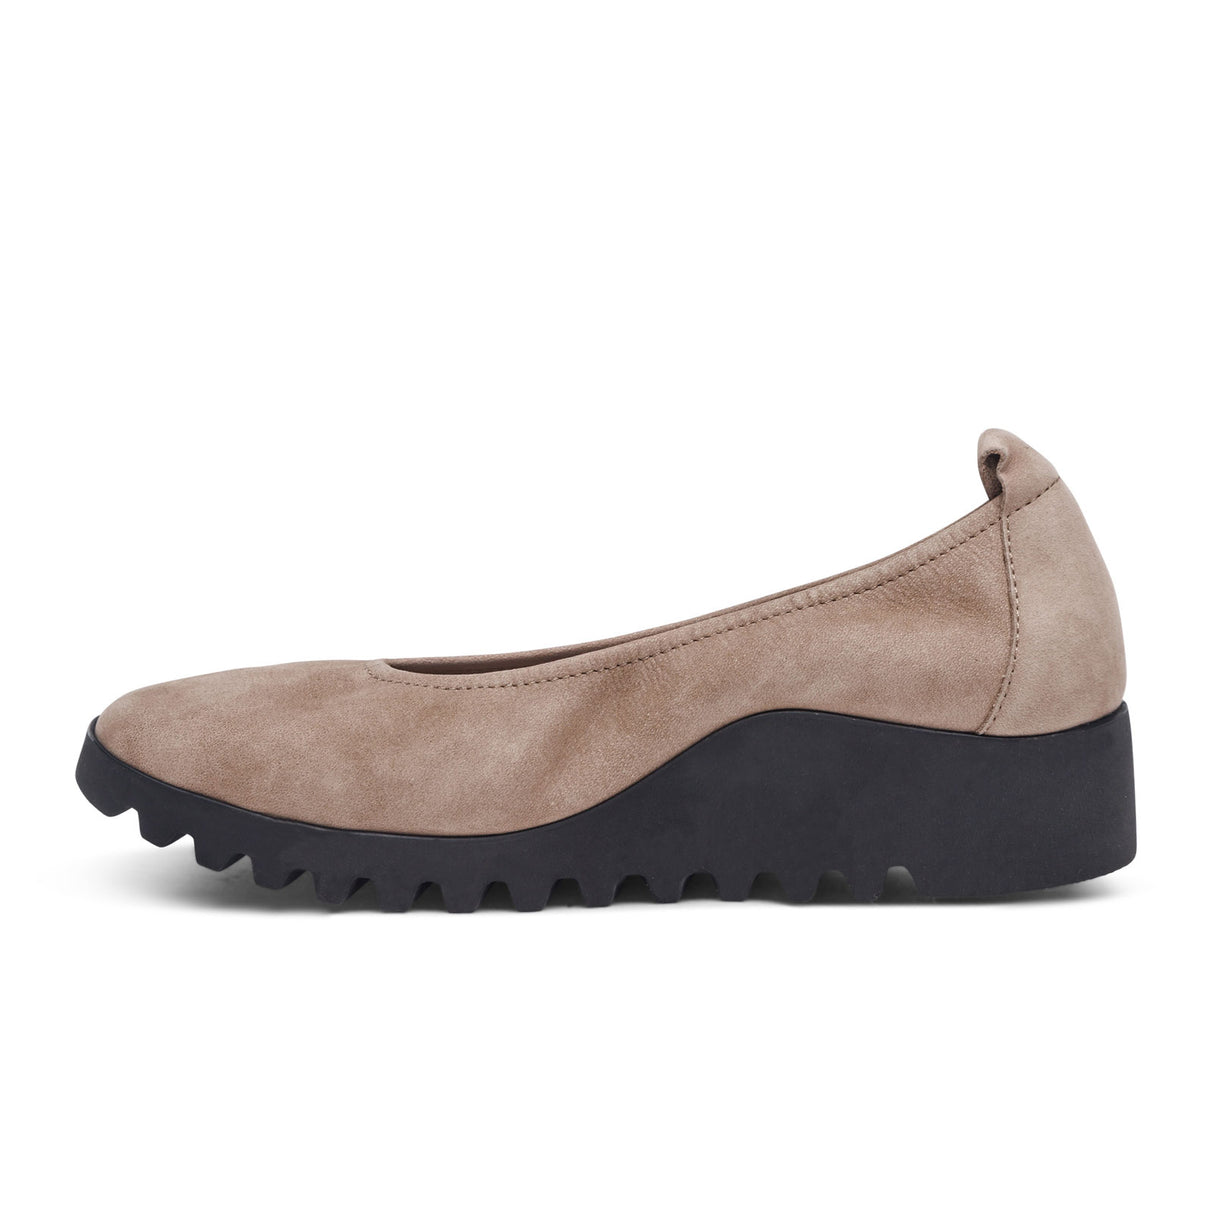 Aetrex Brianna Ballet Flat (Women) - Taupe Dress-Casual - Flats - The Heel Shoe Fitters